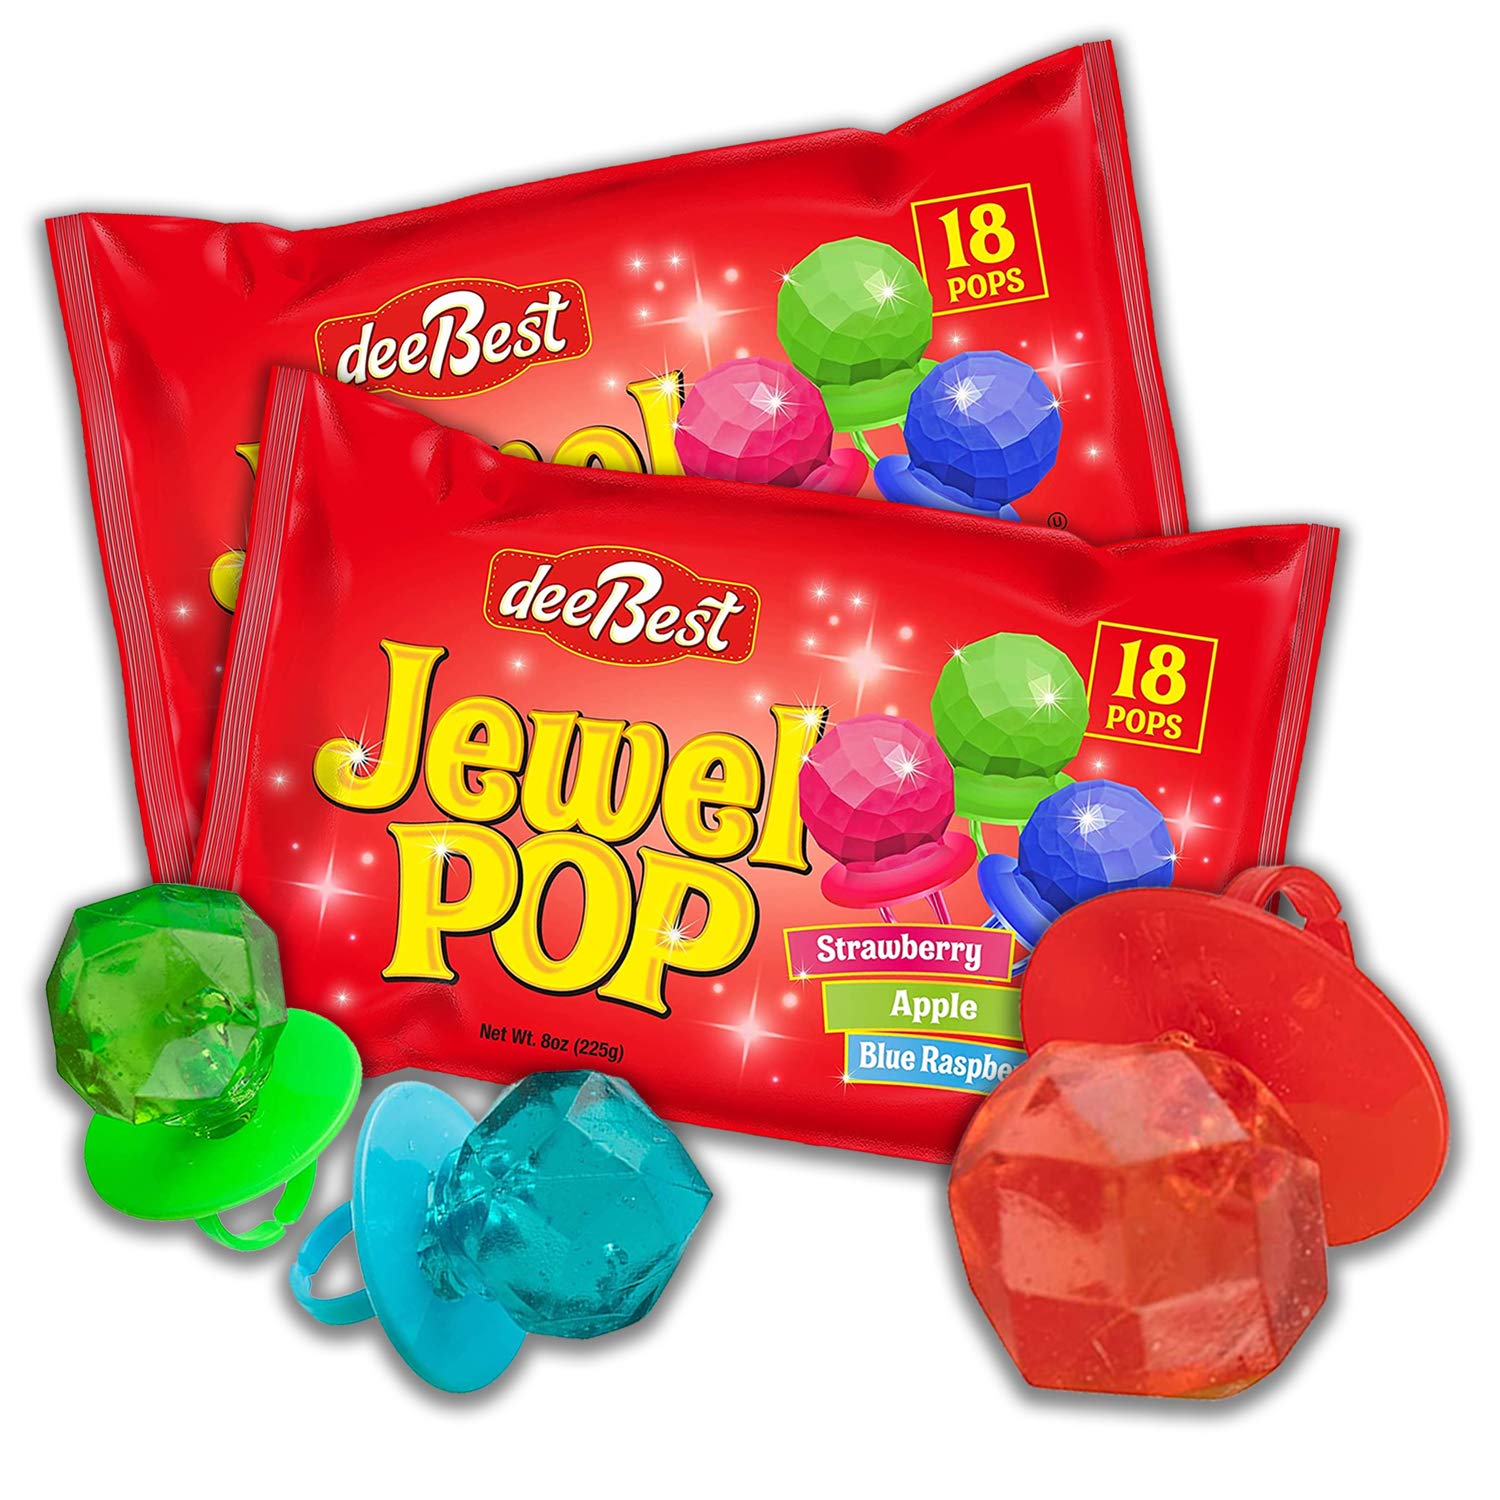  Dee Best Jewel Pop Individually Wrapped Variety Party Pack  18 Count Ring Candy Lollipop Suckers Assorted Flavors